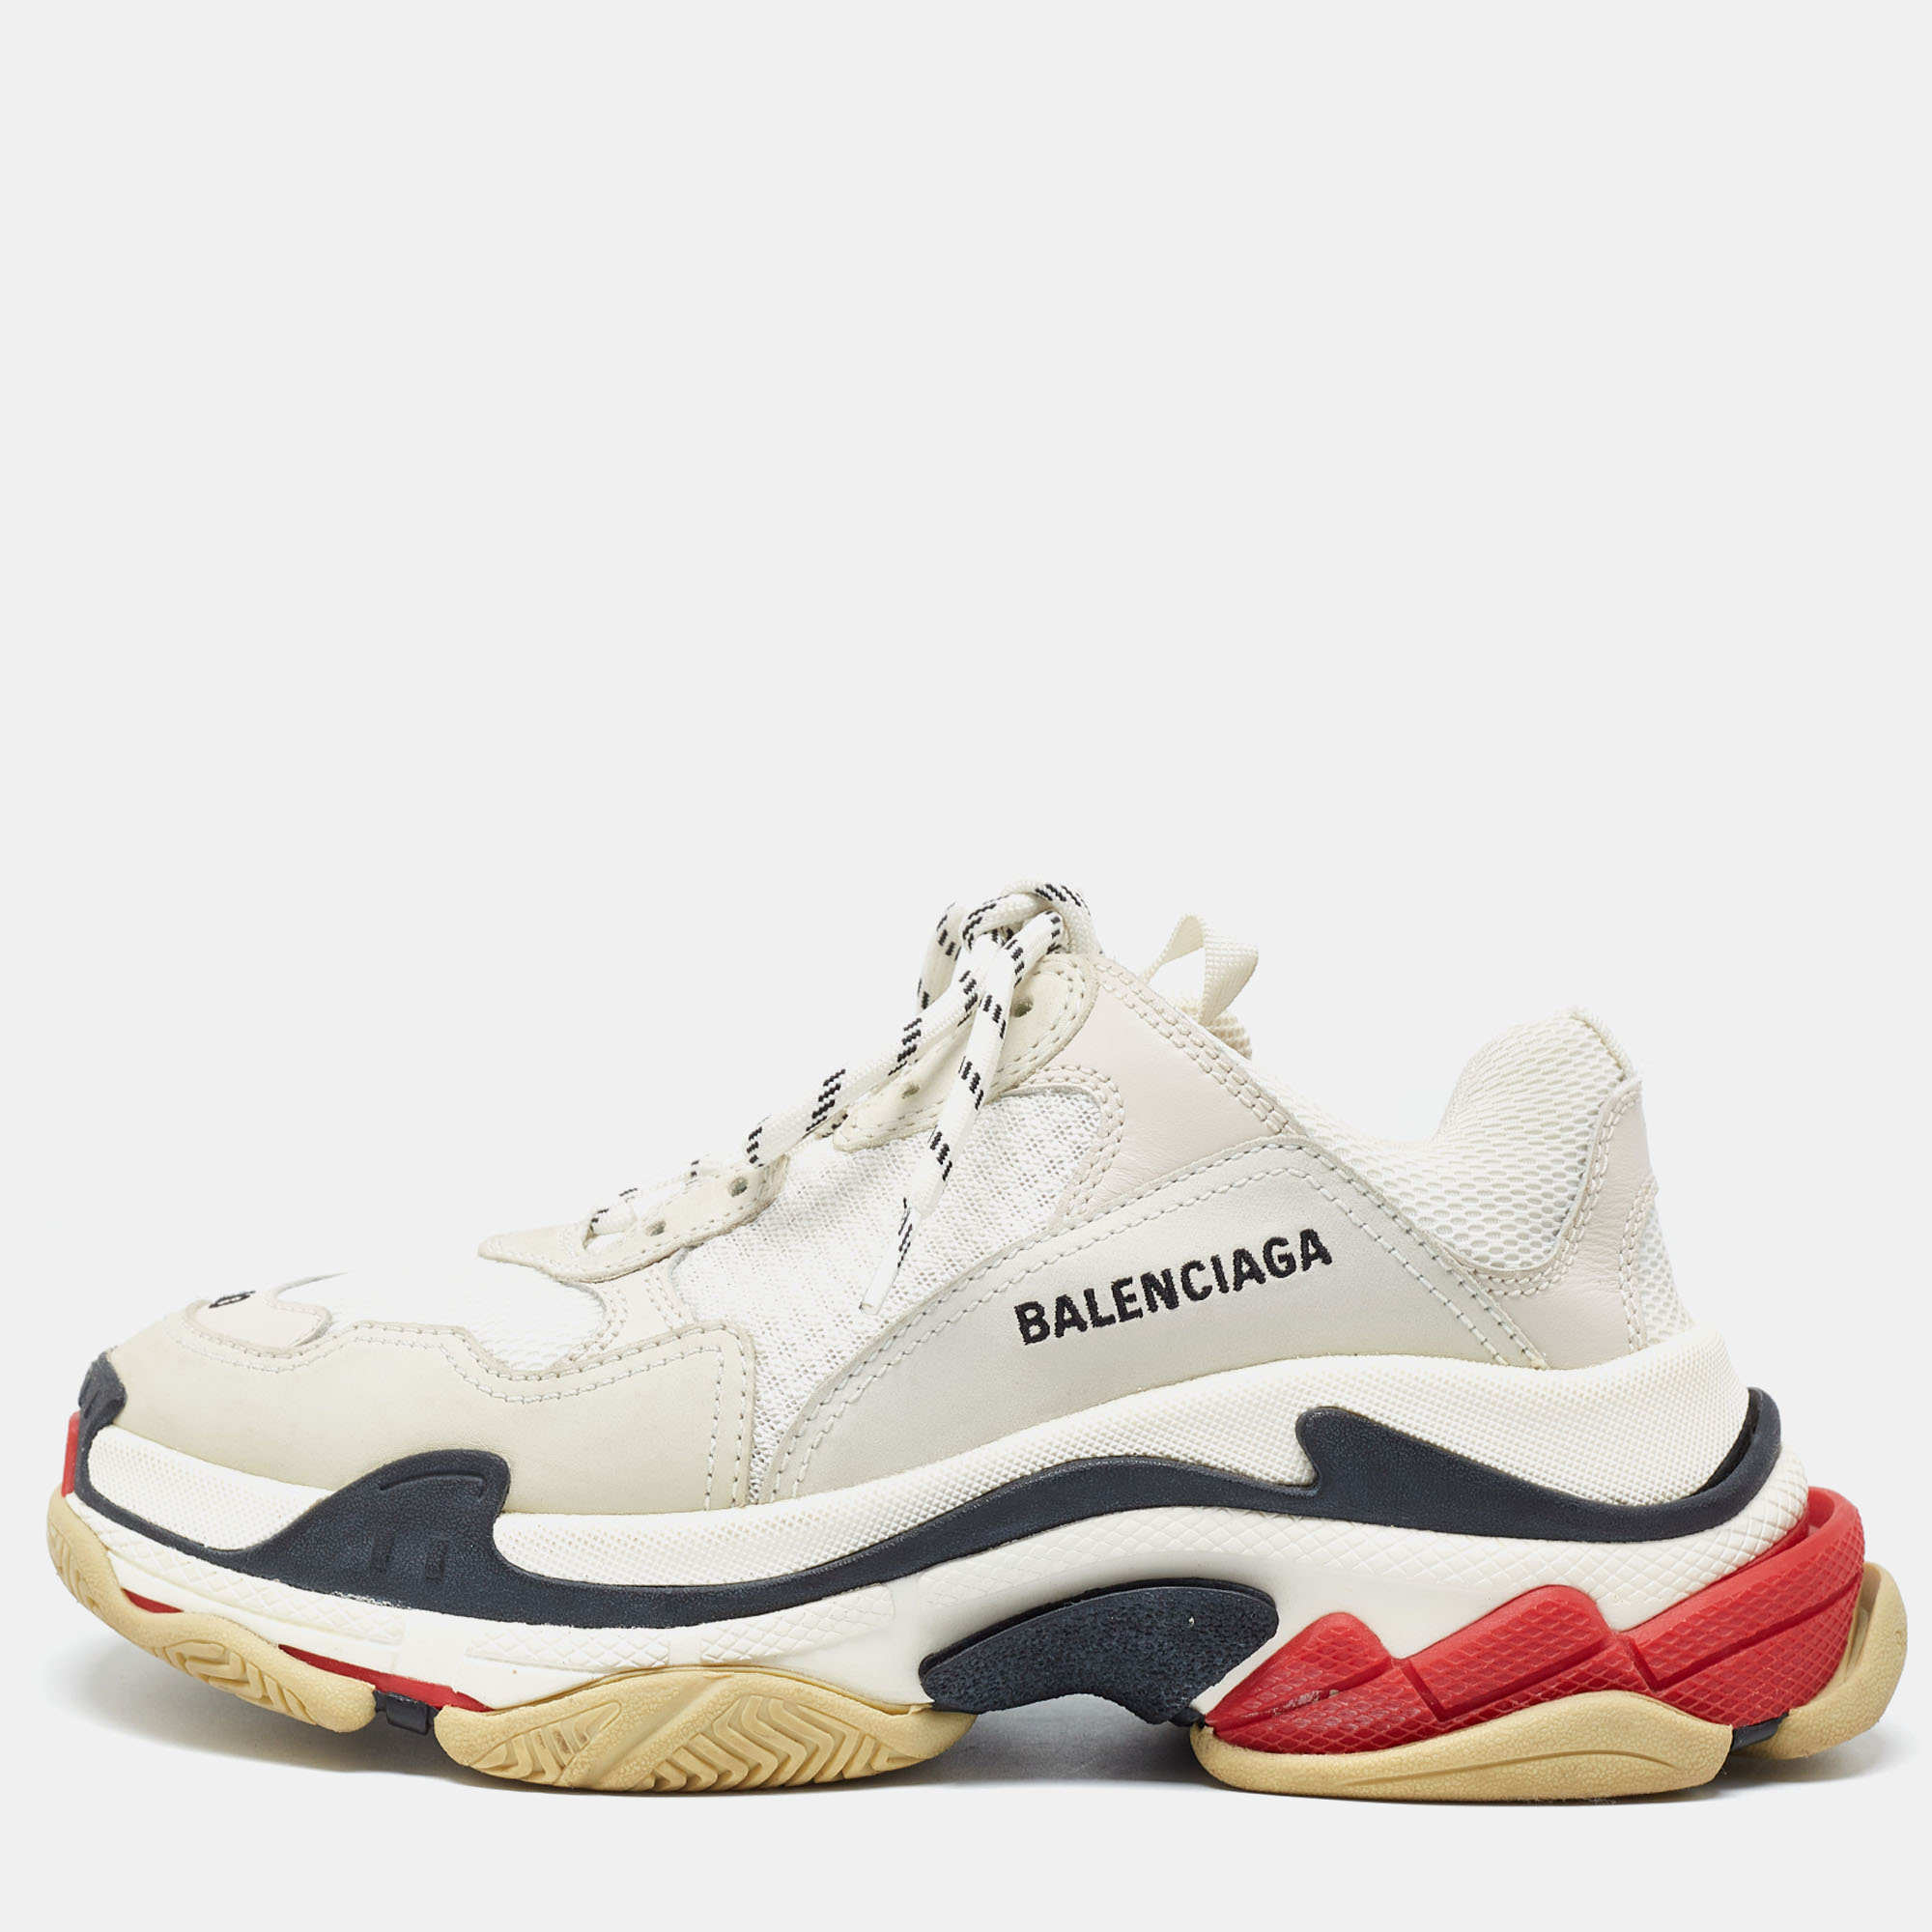 Balenciaga multicolor leather and mesh triple s sneakers size 40